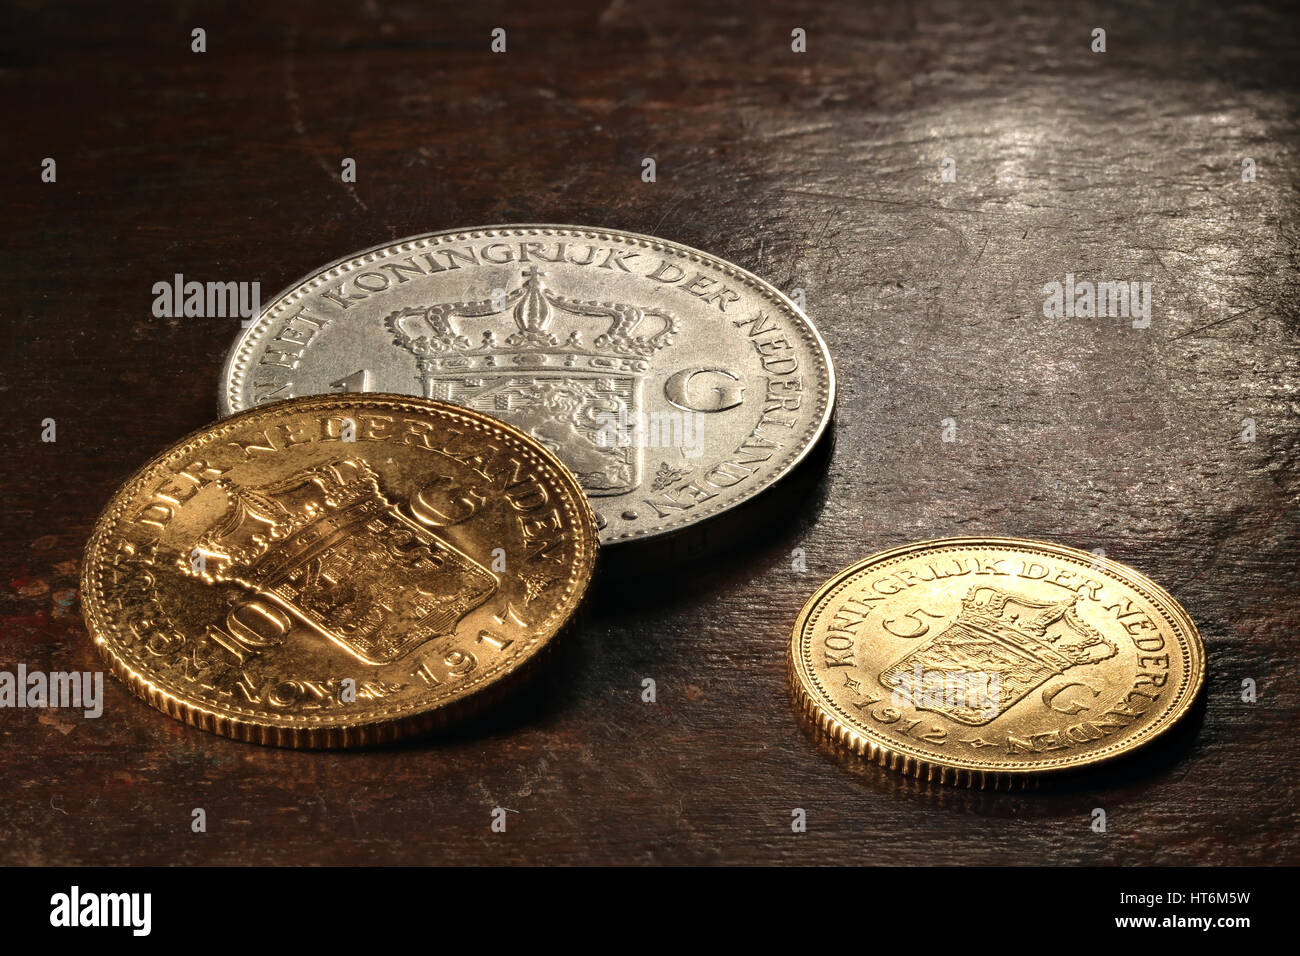 Dutch silver and gold coins on rustic wooden background Stock Photo